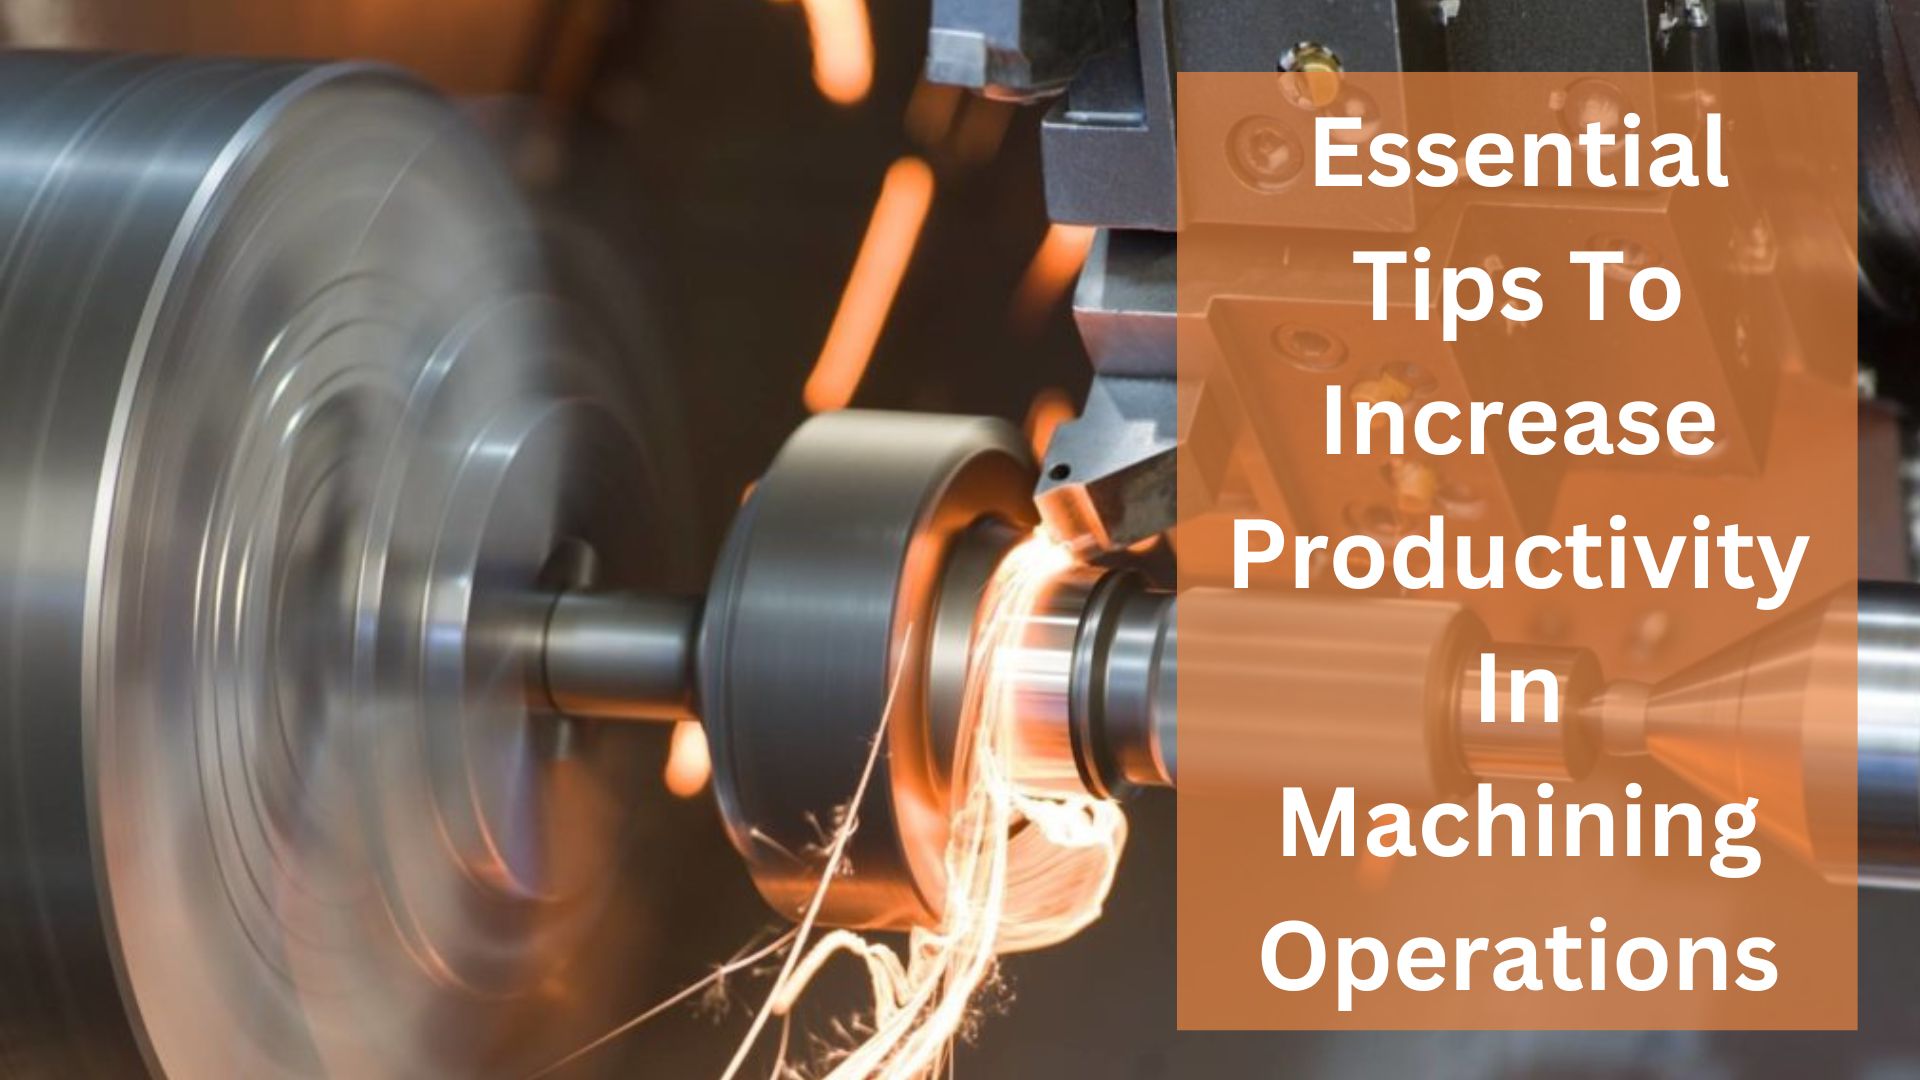 Essential Tips To Increase Productivity In Machining Operations